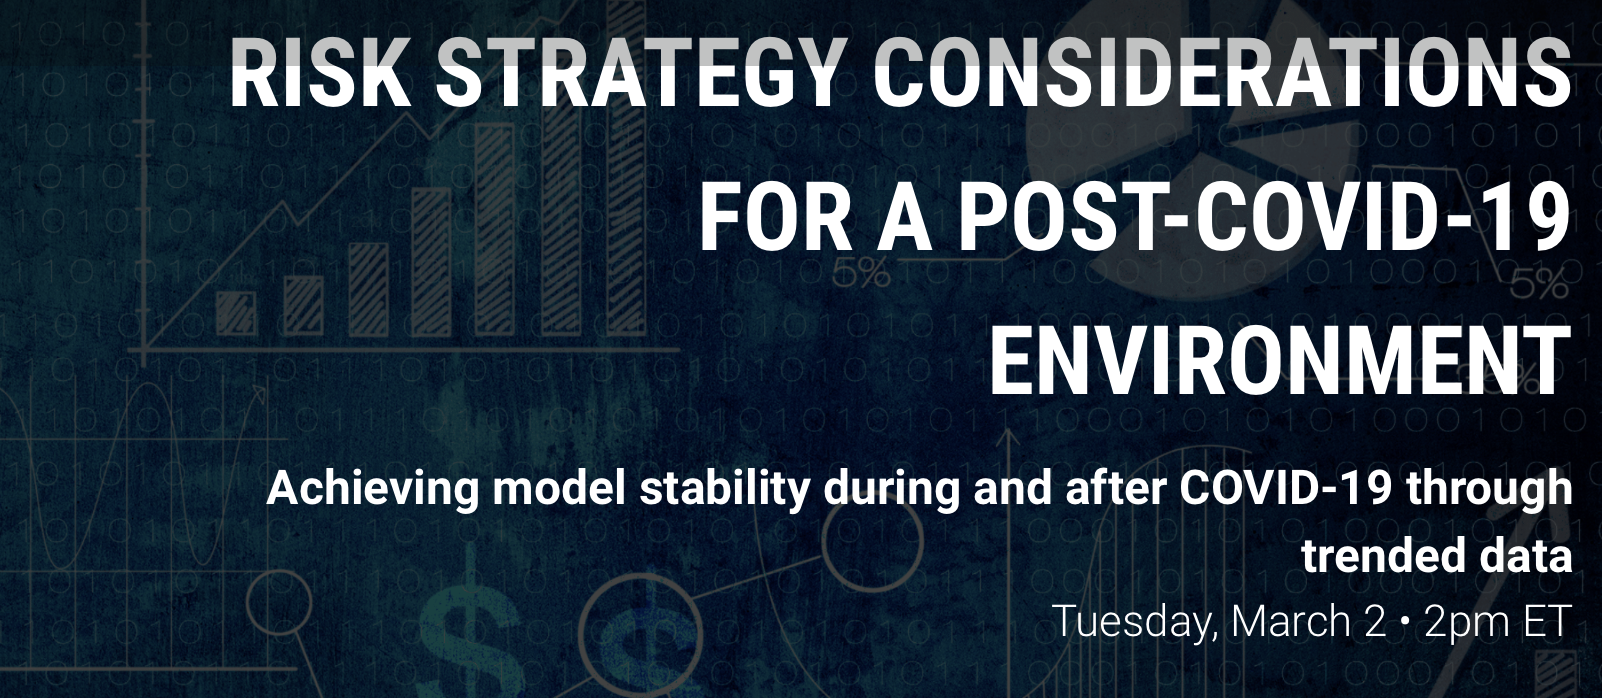 Risk Strategy Considerations for a Post-Covid-19 Environment